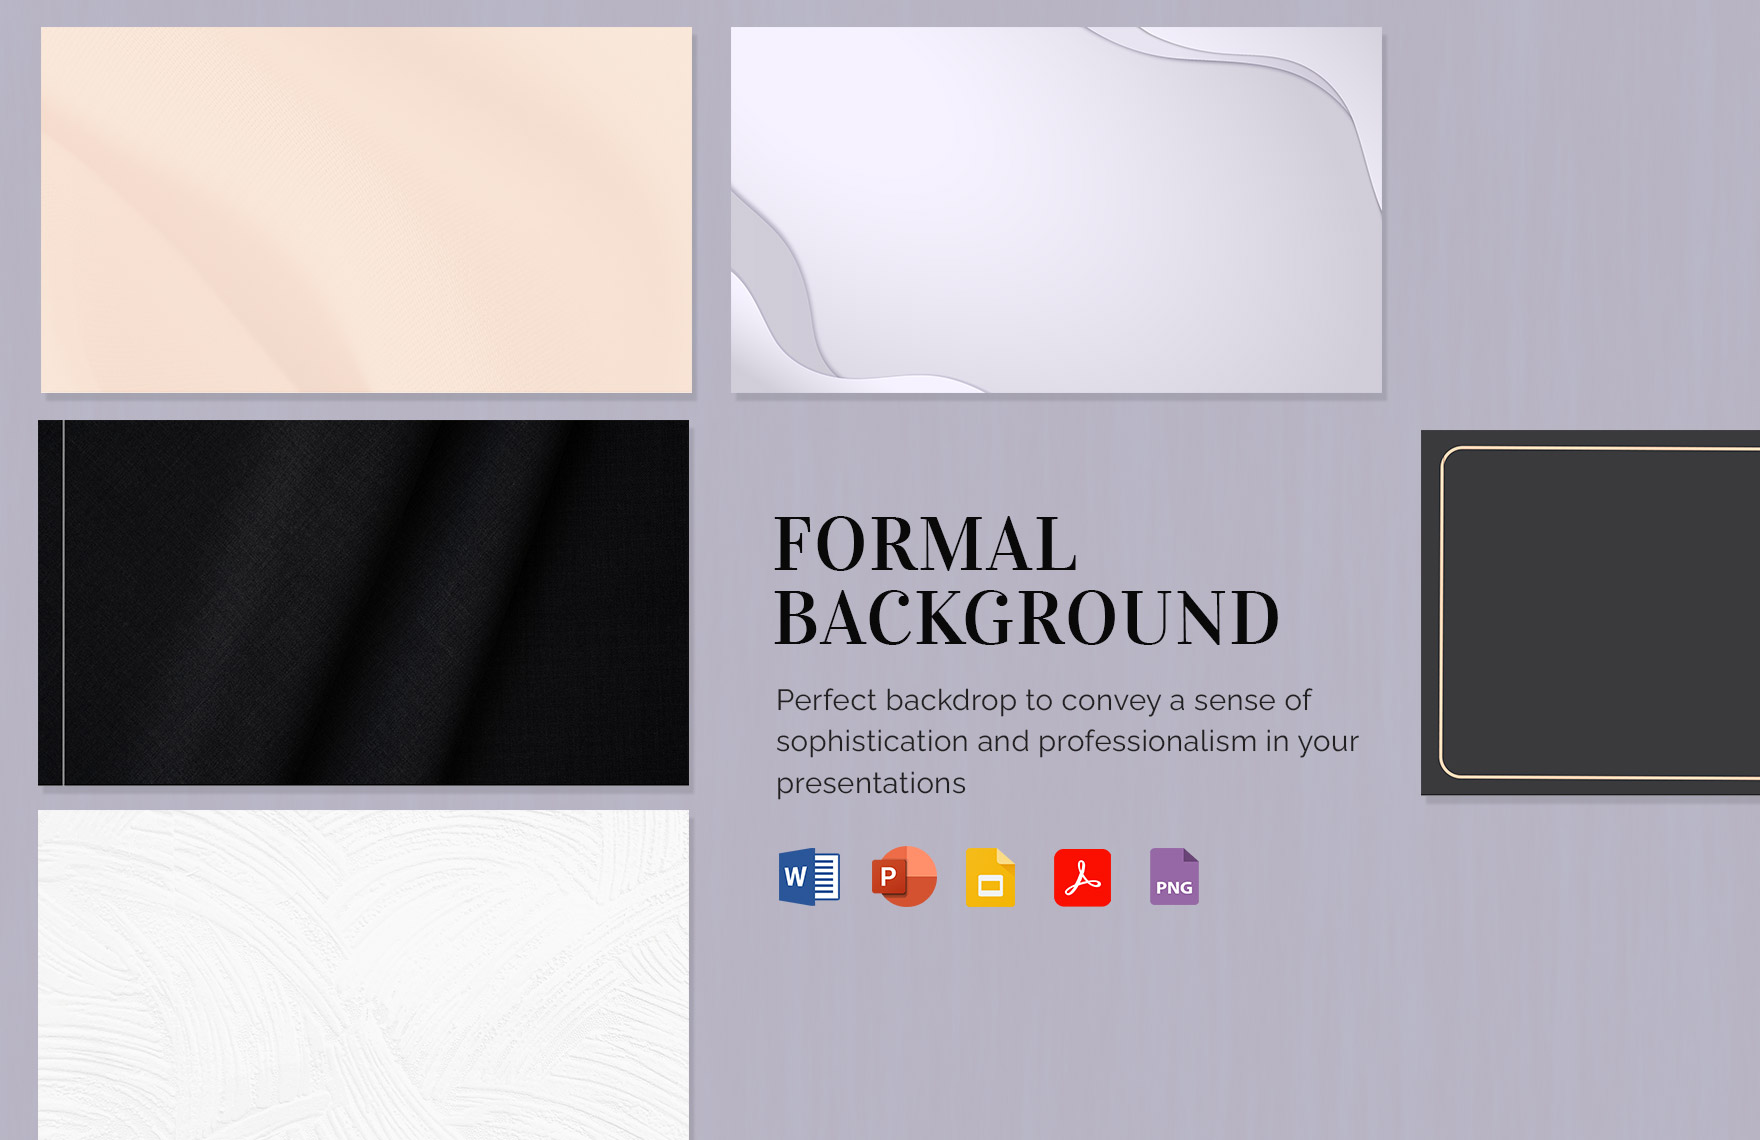 Formal Background Template